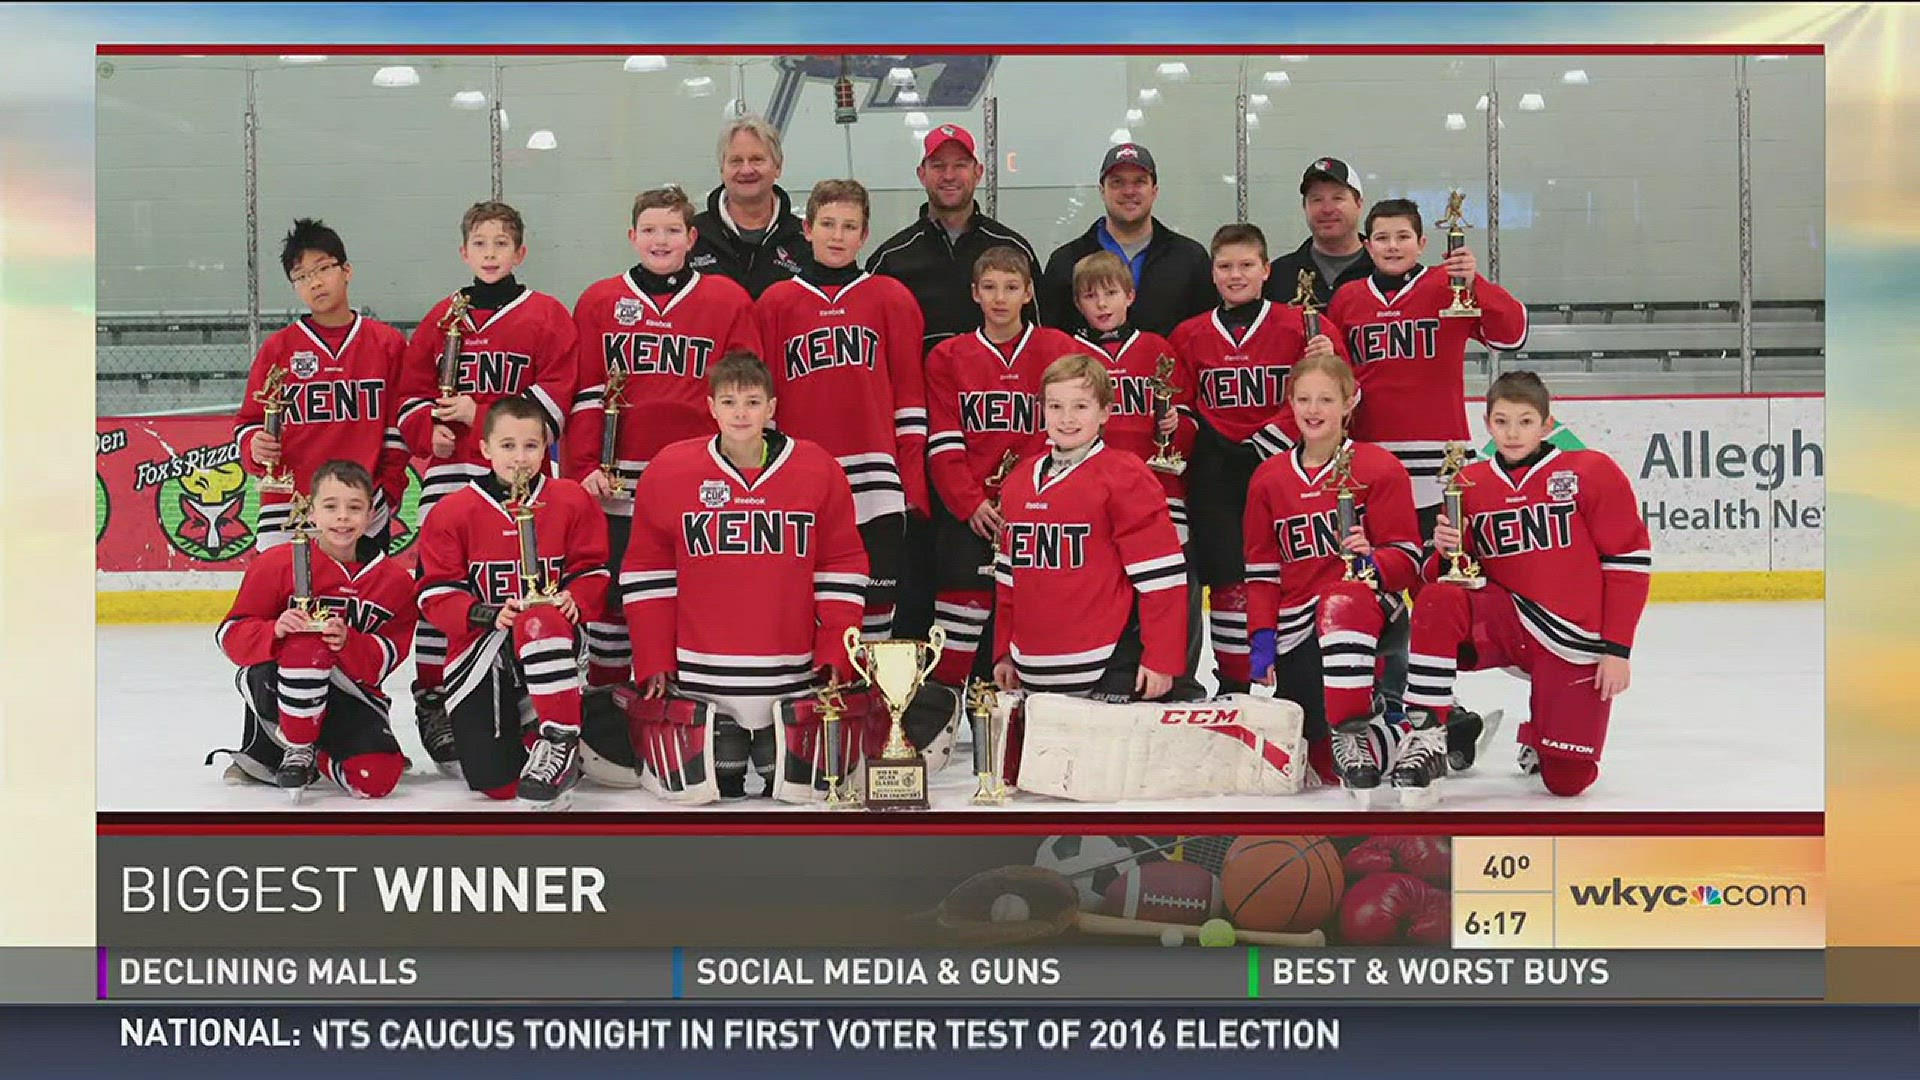 The Biggest Winner for Monday, February 1 2016 are the Kent Cyclones Squirt Team.